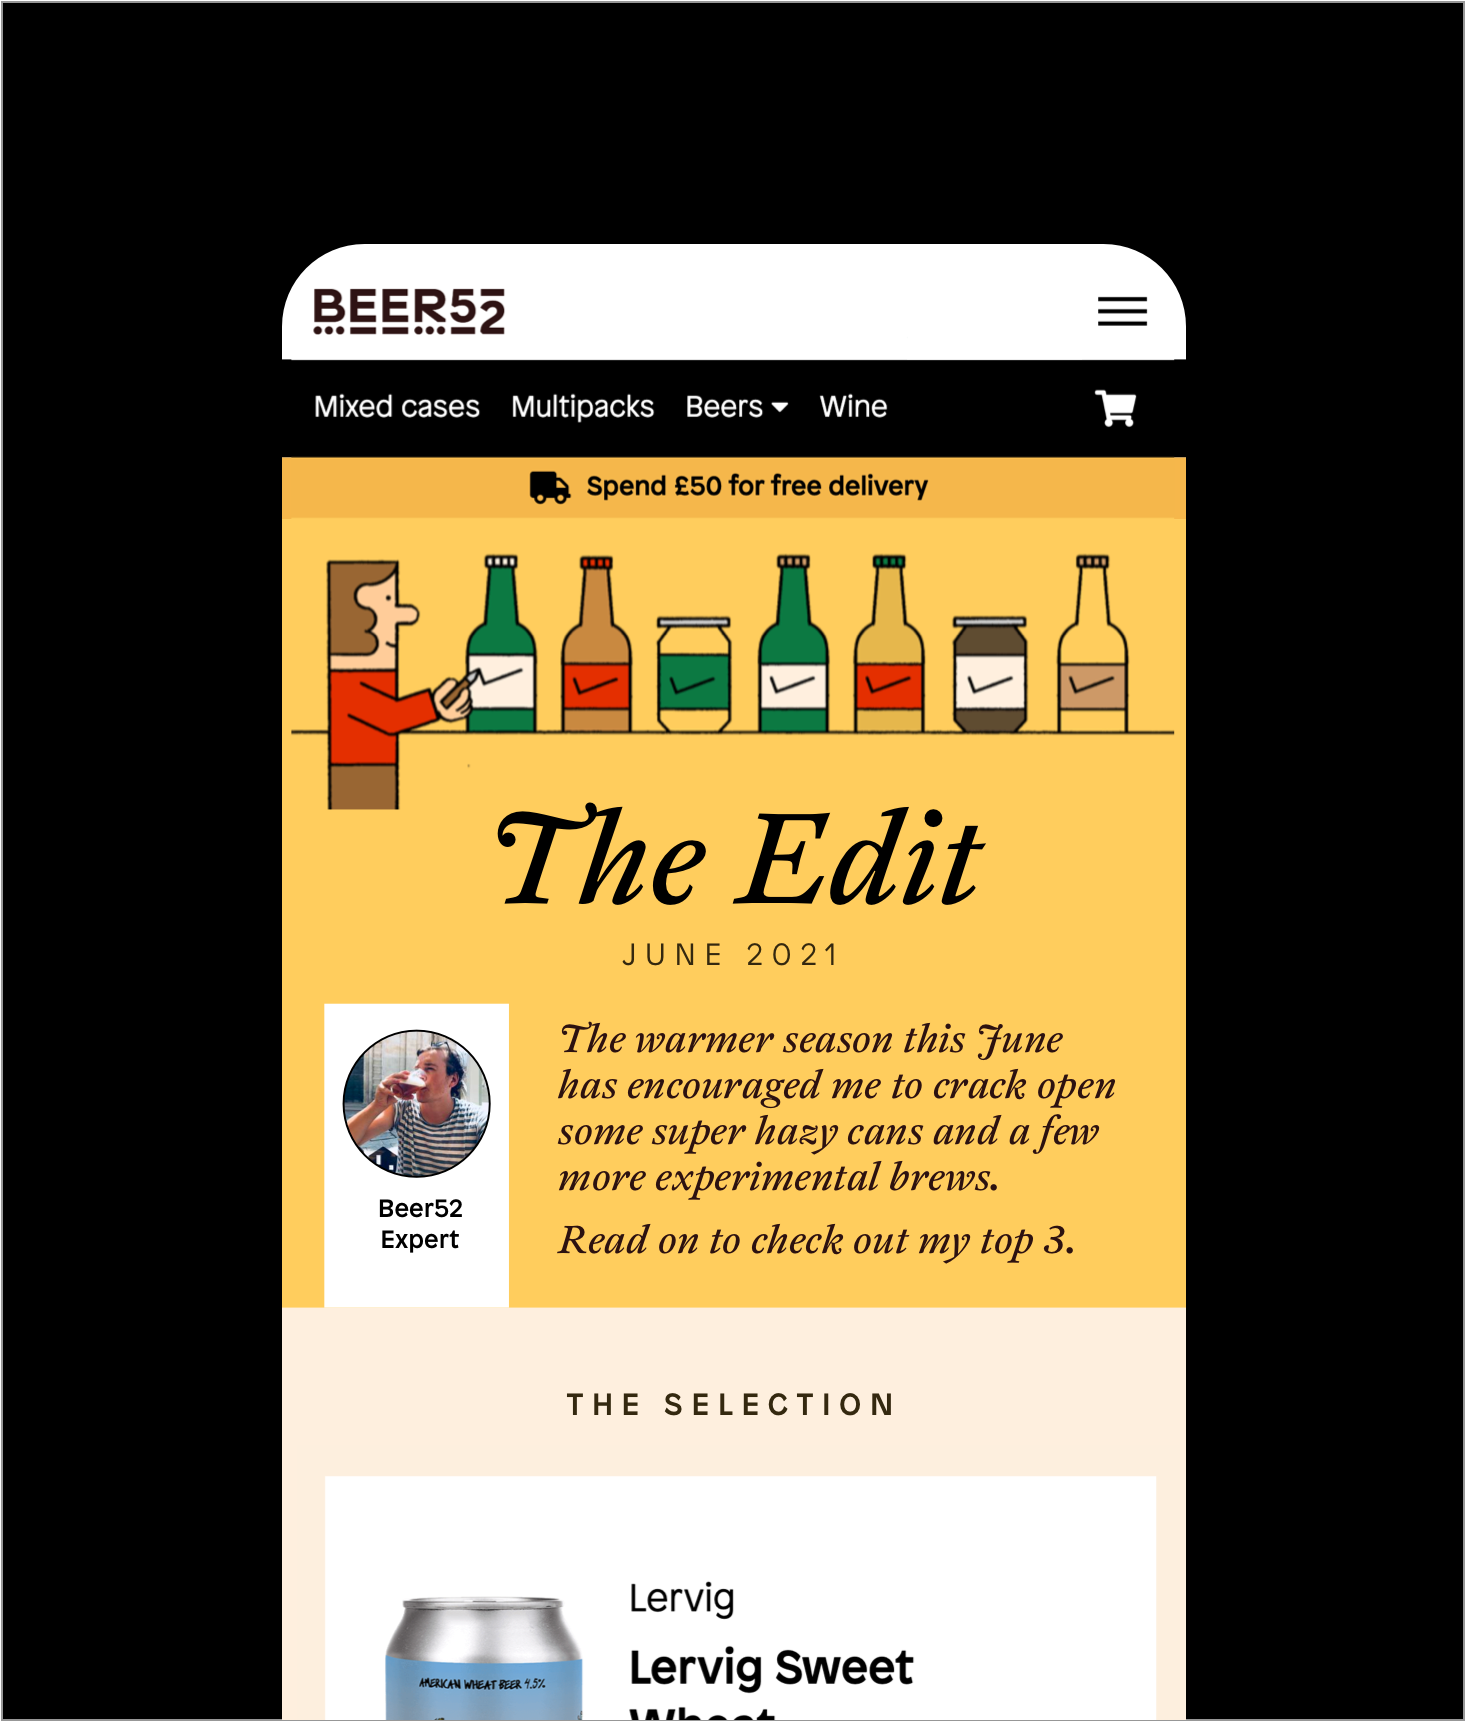 A mobile phone style screen depicts the Beer52 “The Edit” page on a black background